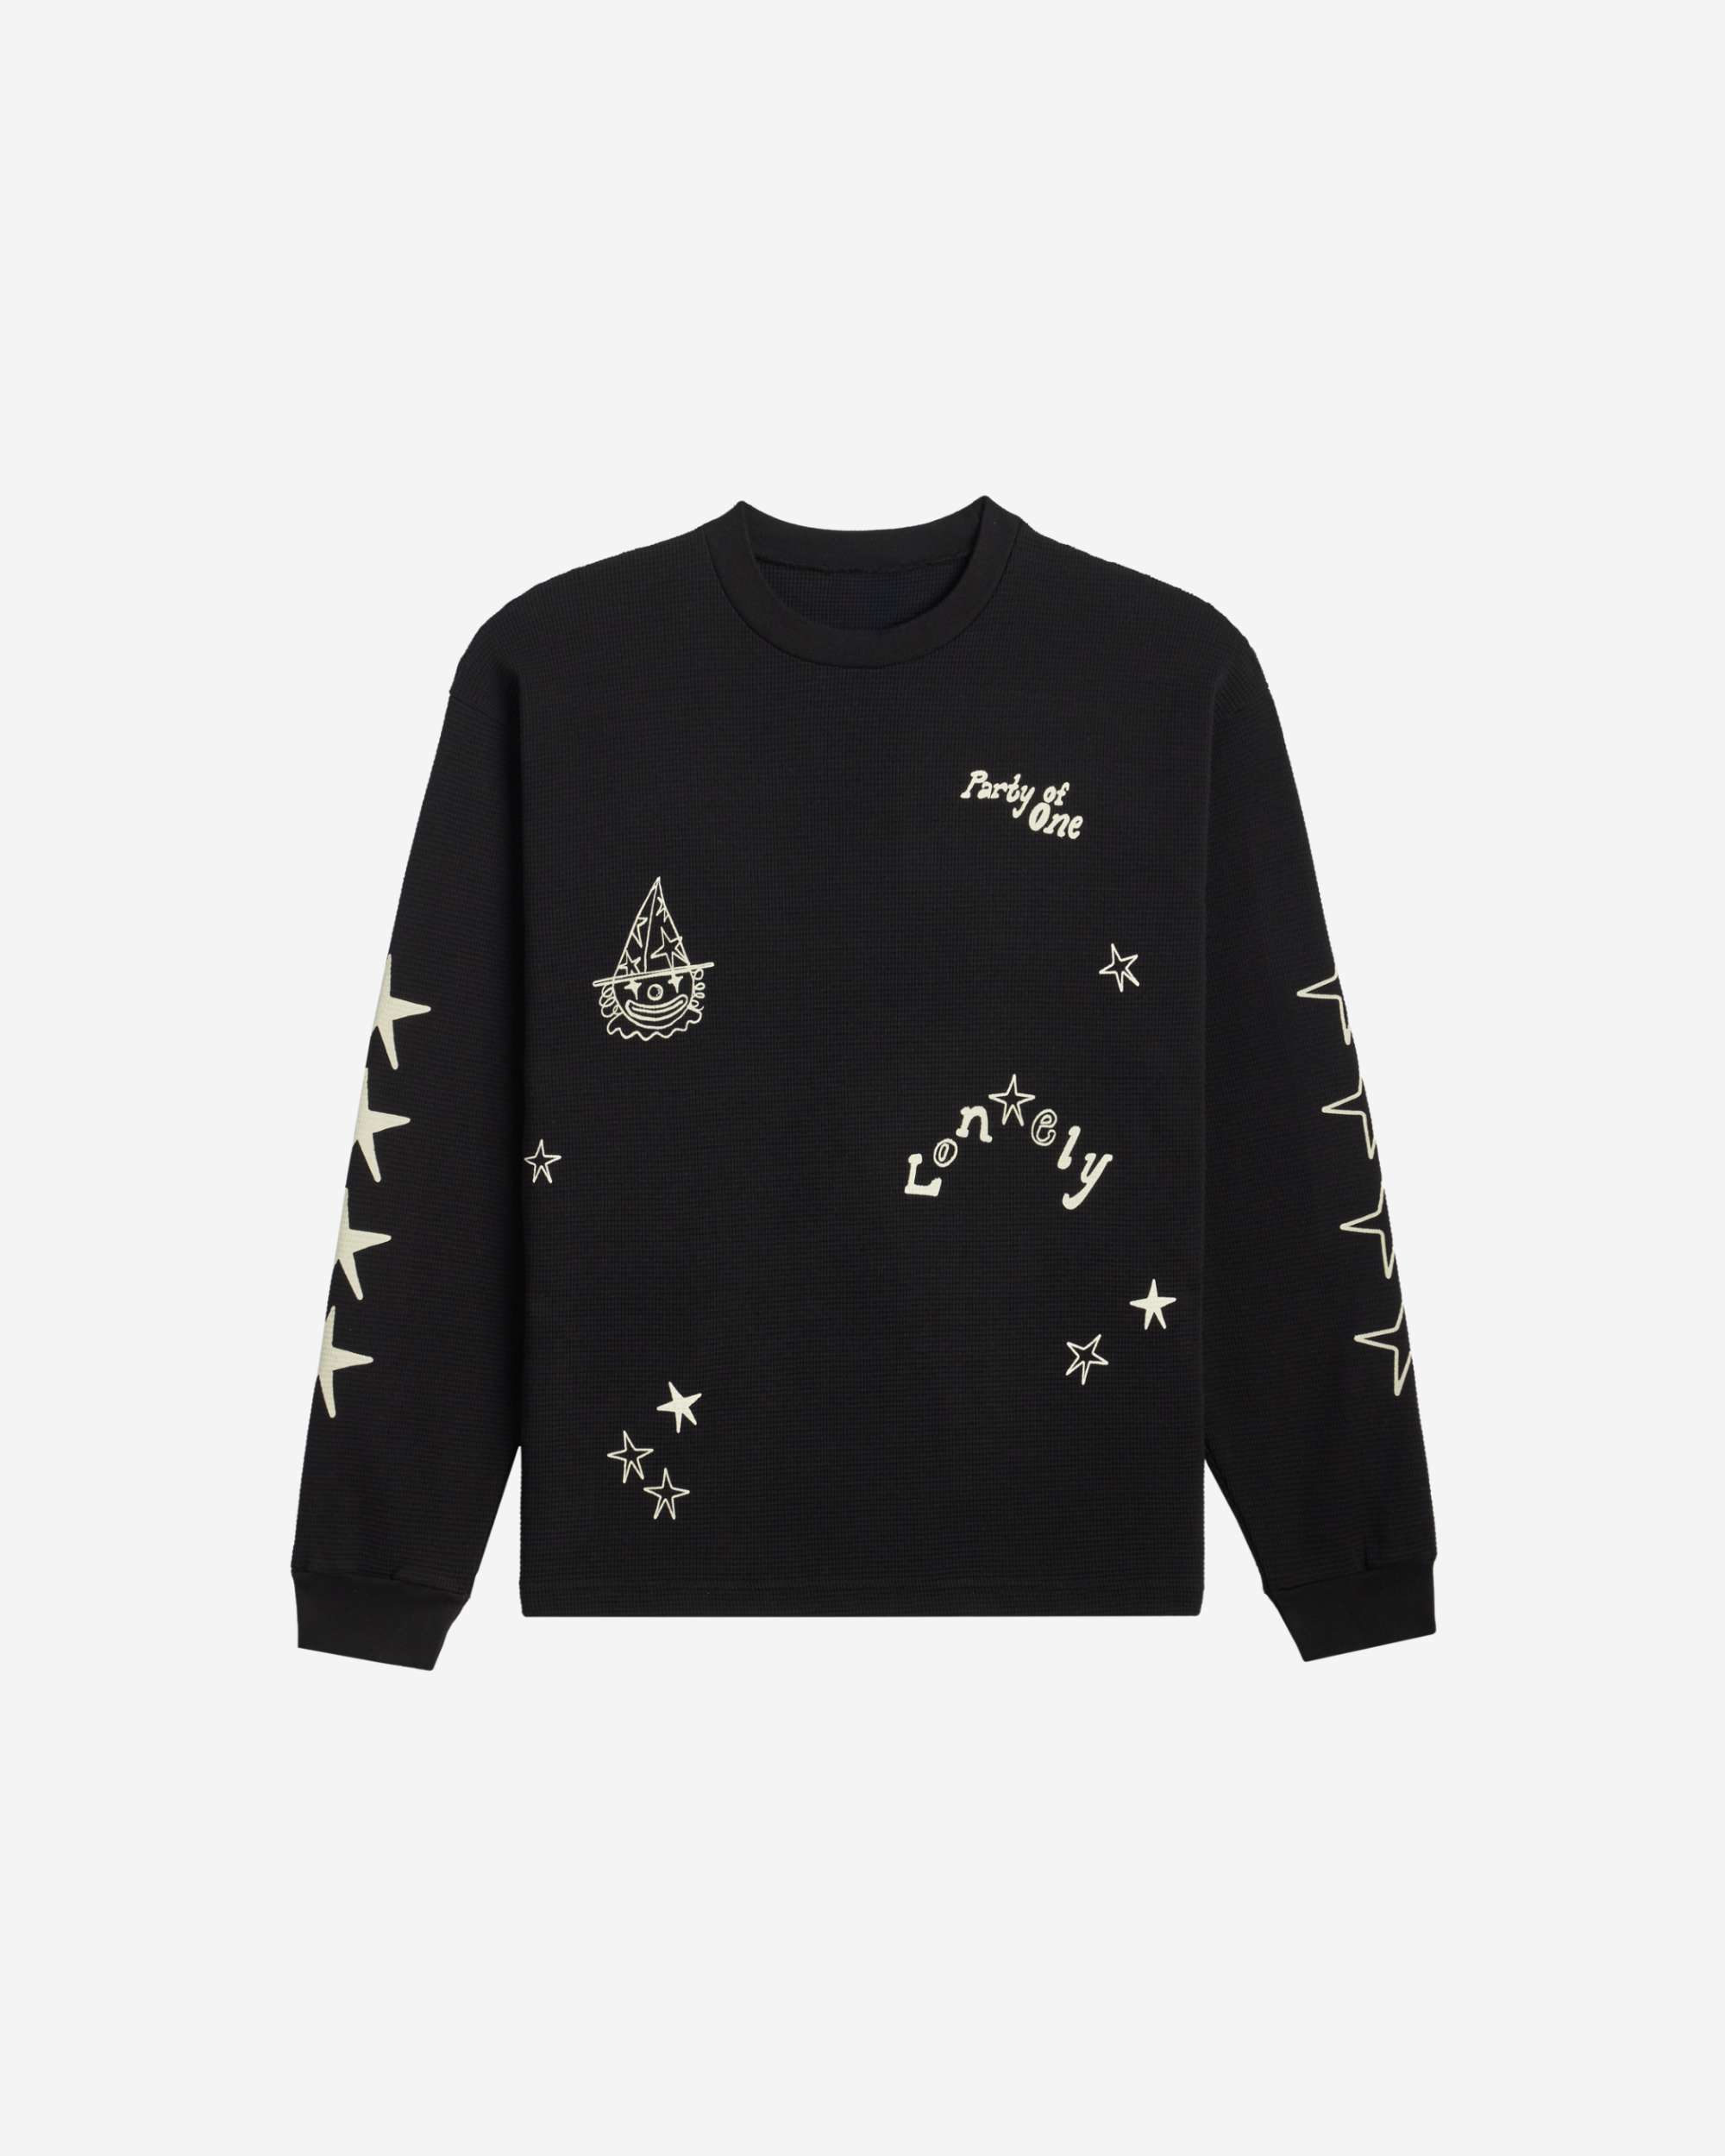 Party of One Thermal Long Sleeve